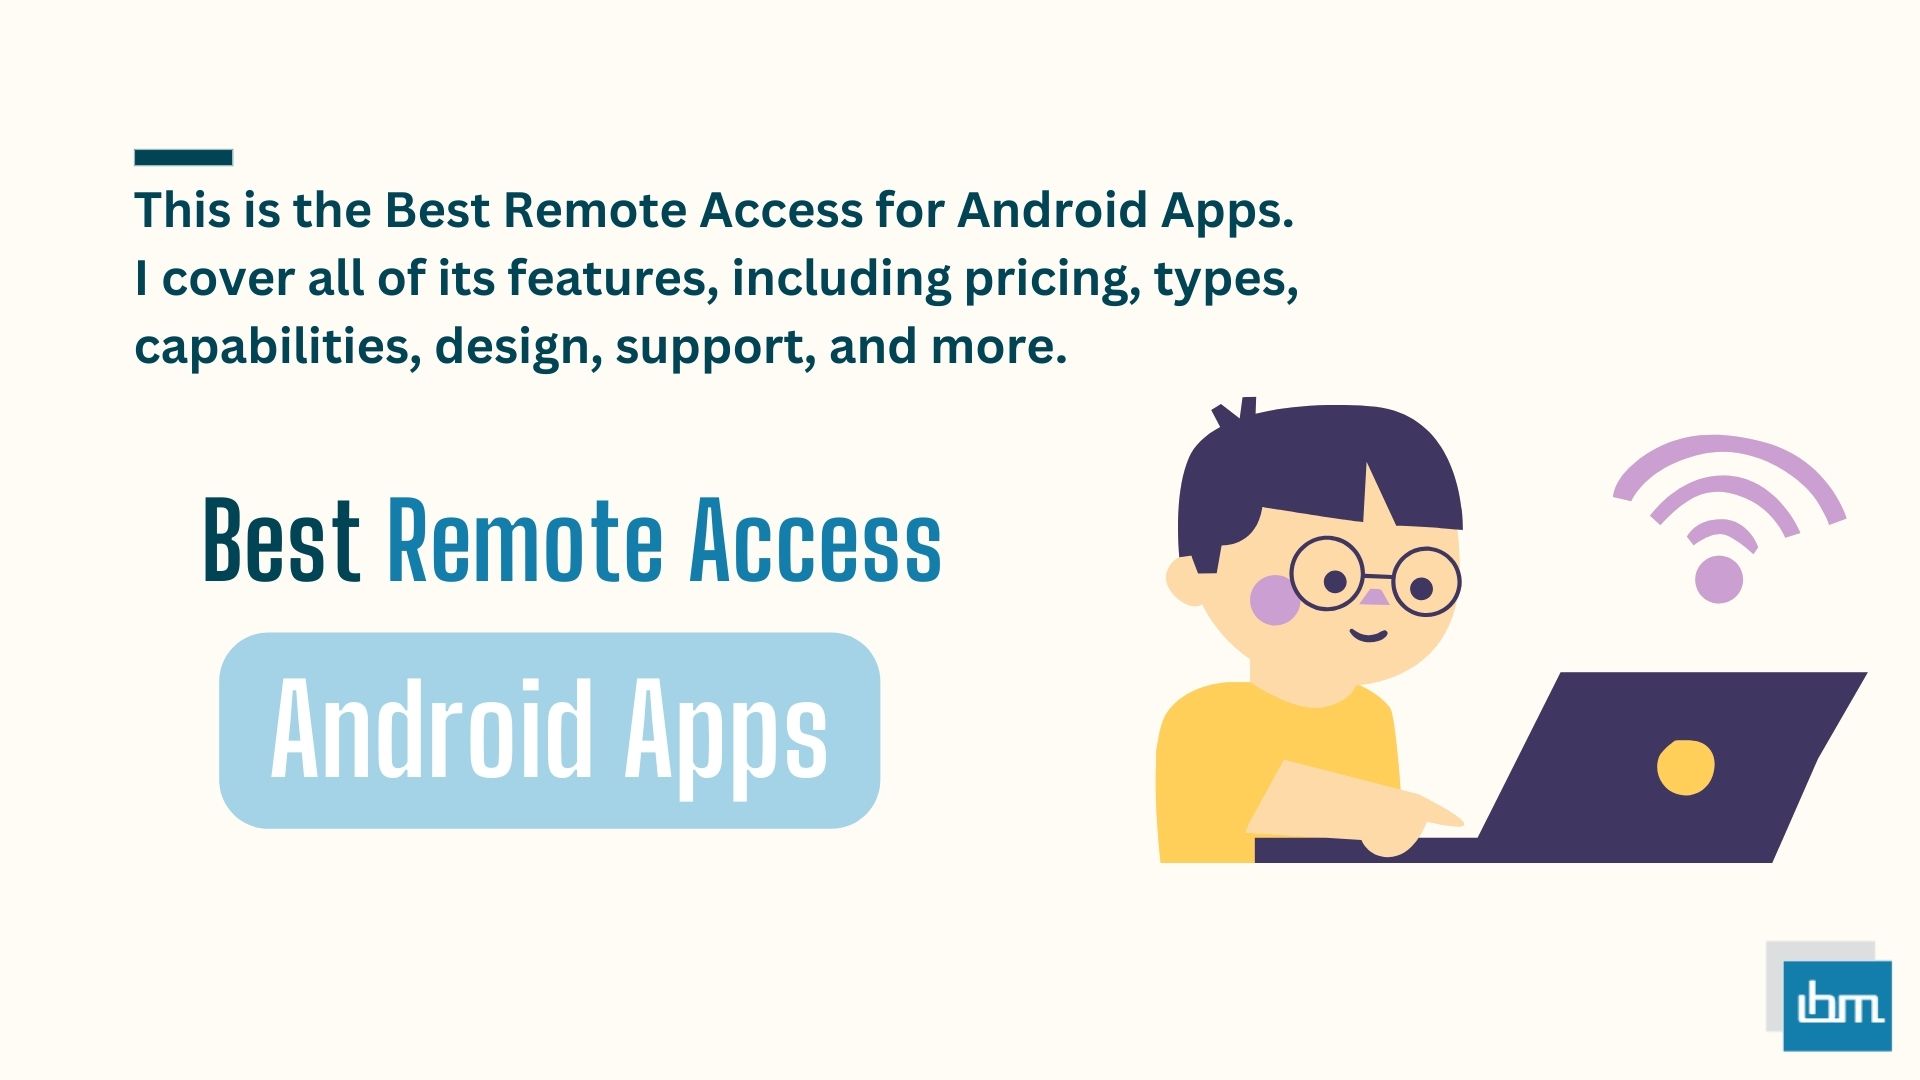 Best Remote Access for Android Apps